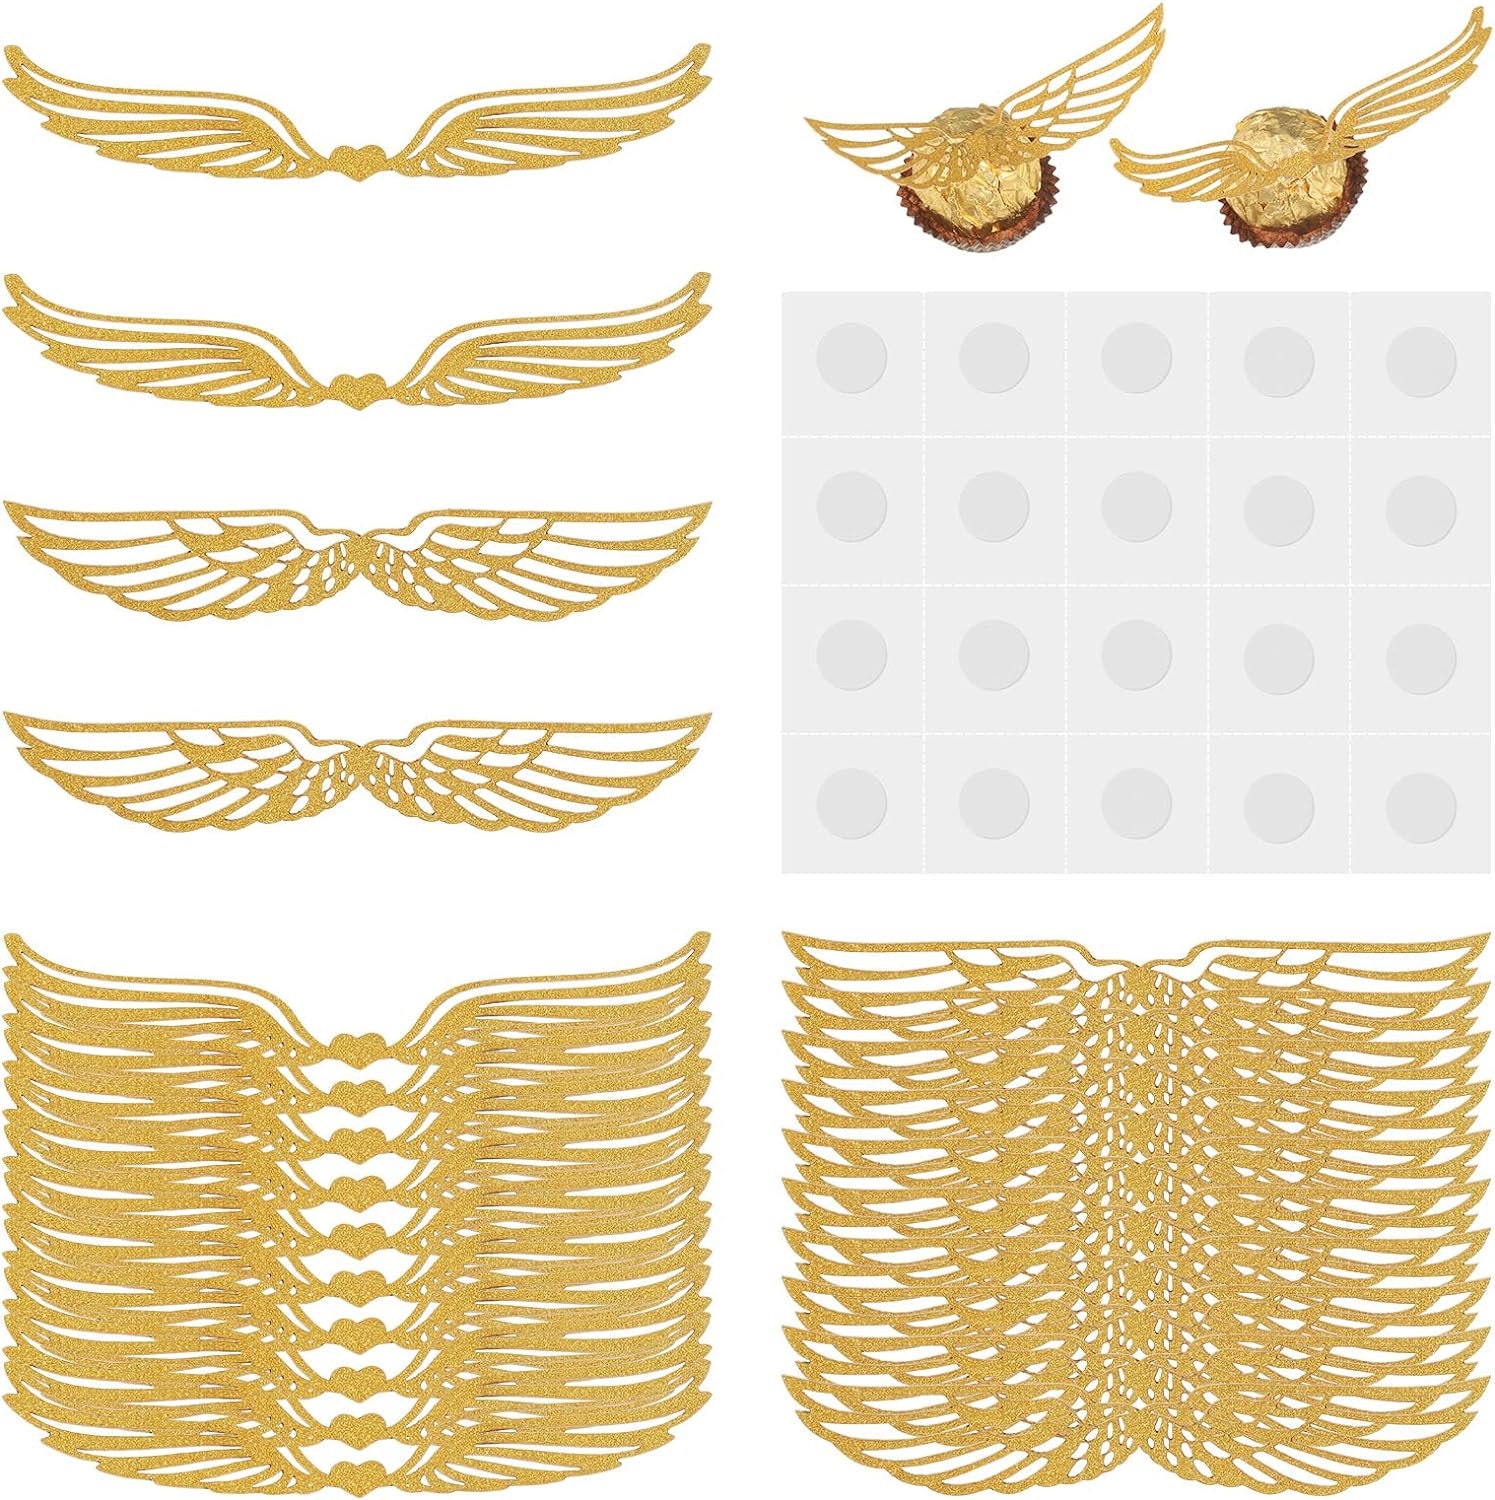 Golden Snitch wings (Harry Potter)